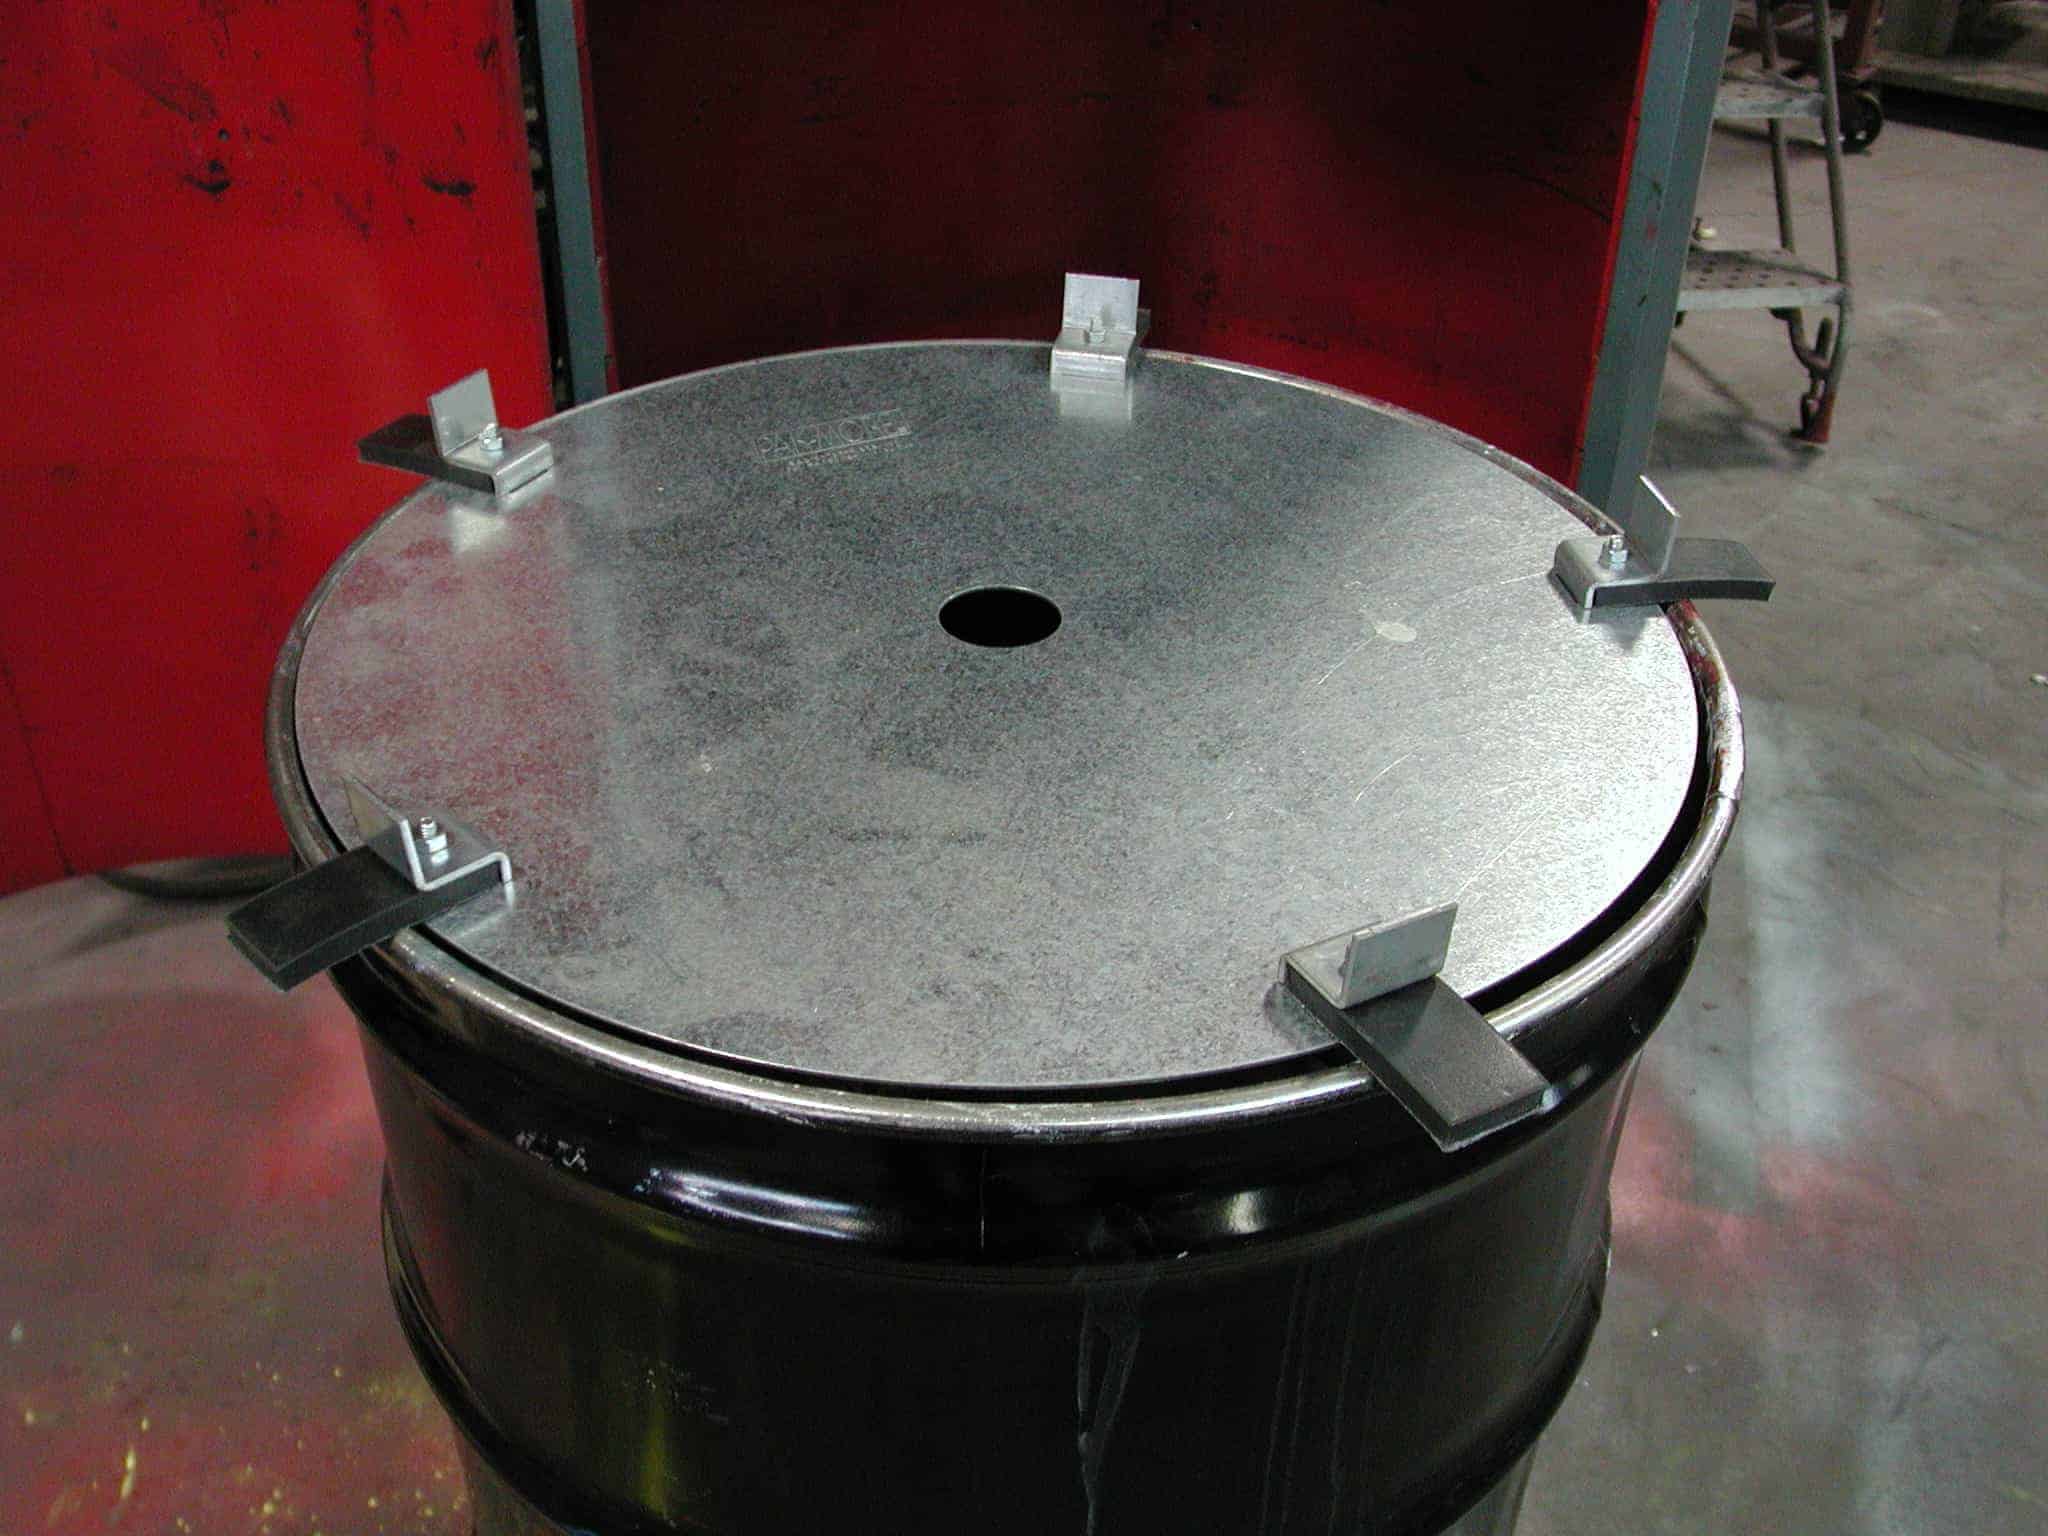 Pak-More Hold-Down Disks prevent waste springback. Lower Drum Compacting Costs.